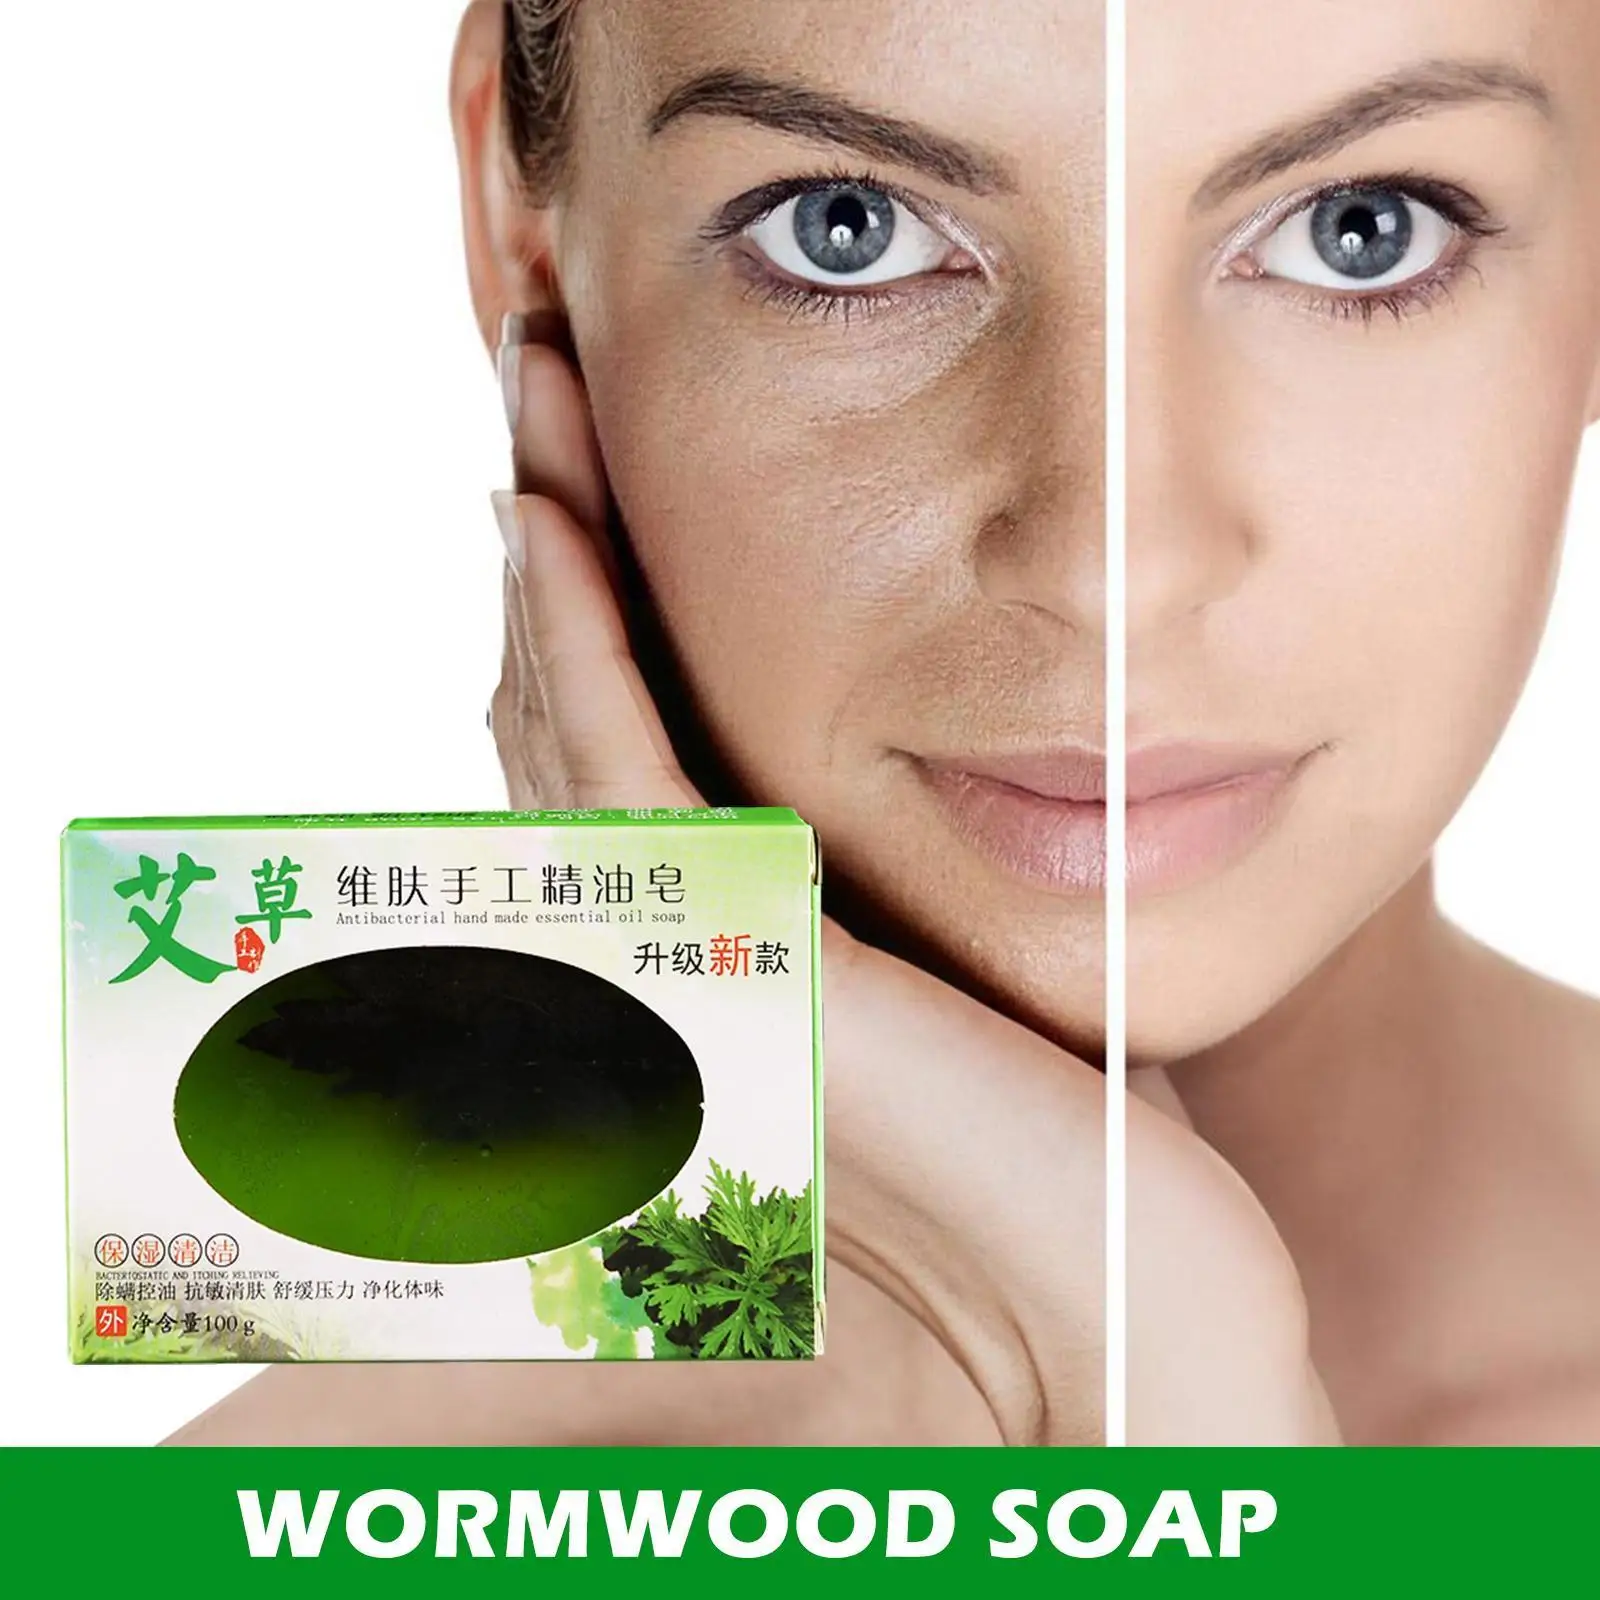 

100g Wormwood Soapto Kill Mites Cleansing Decontamination Tools Essential Soap Hand Soap Charcoal Cleaning Bamboo Oil A0g3